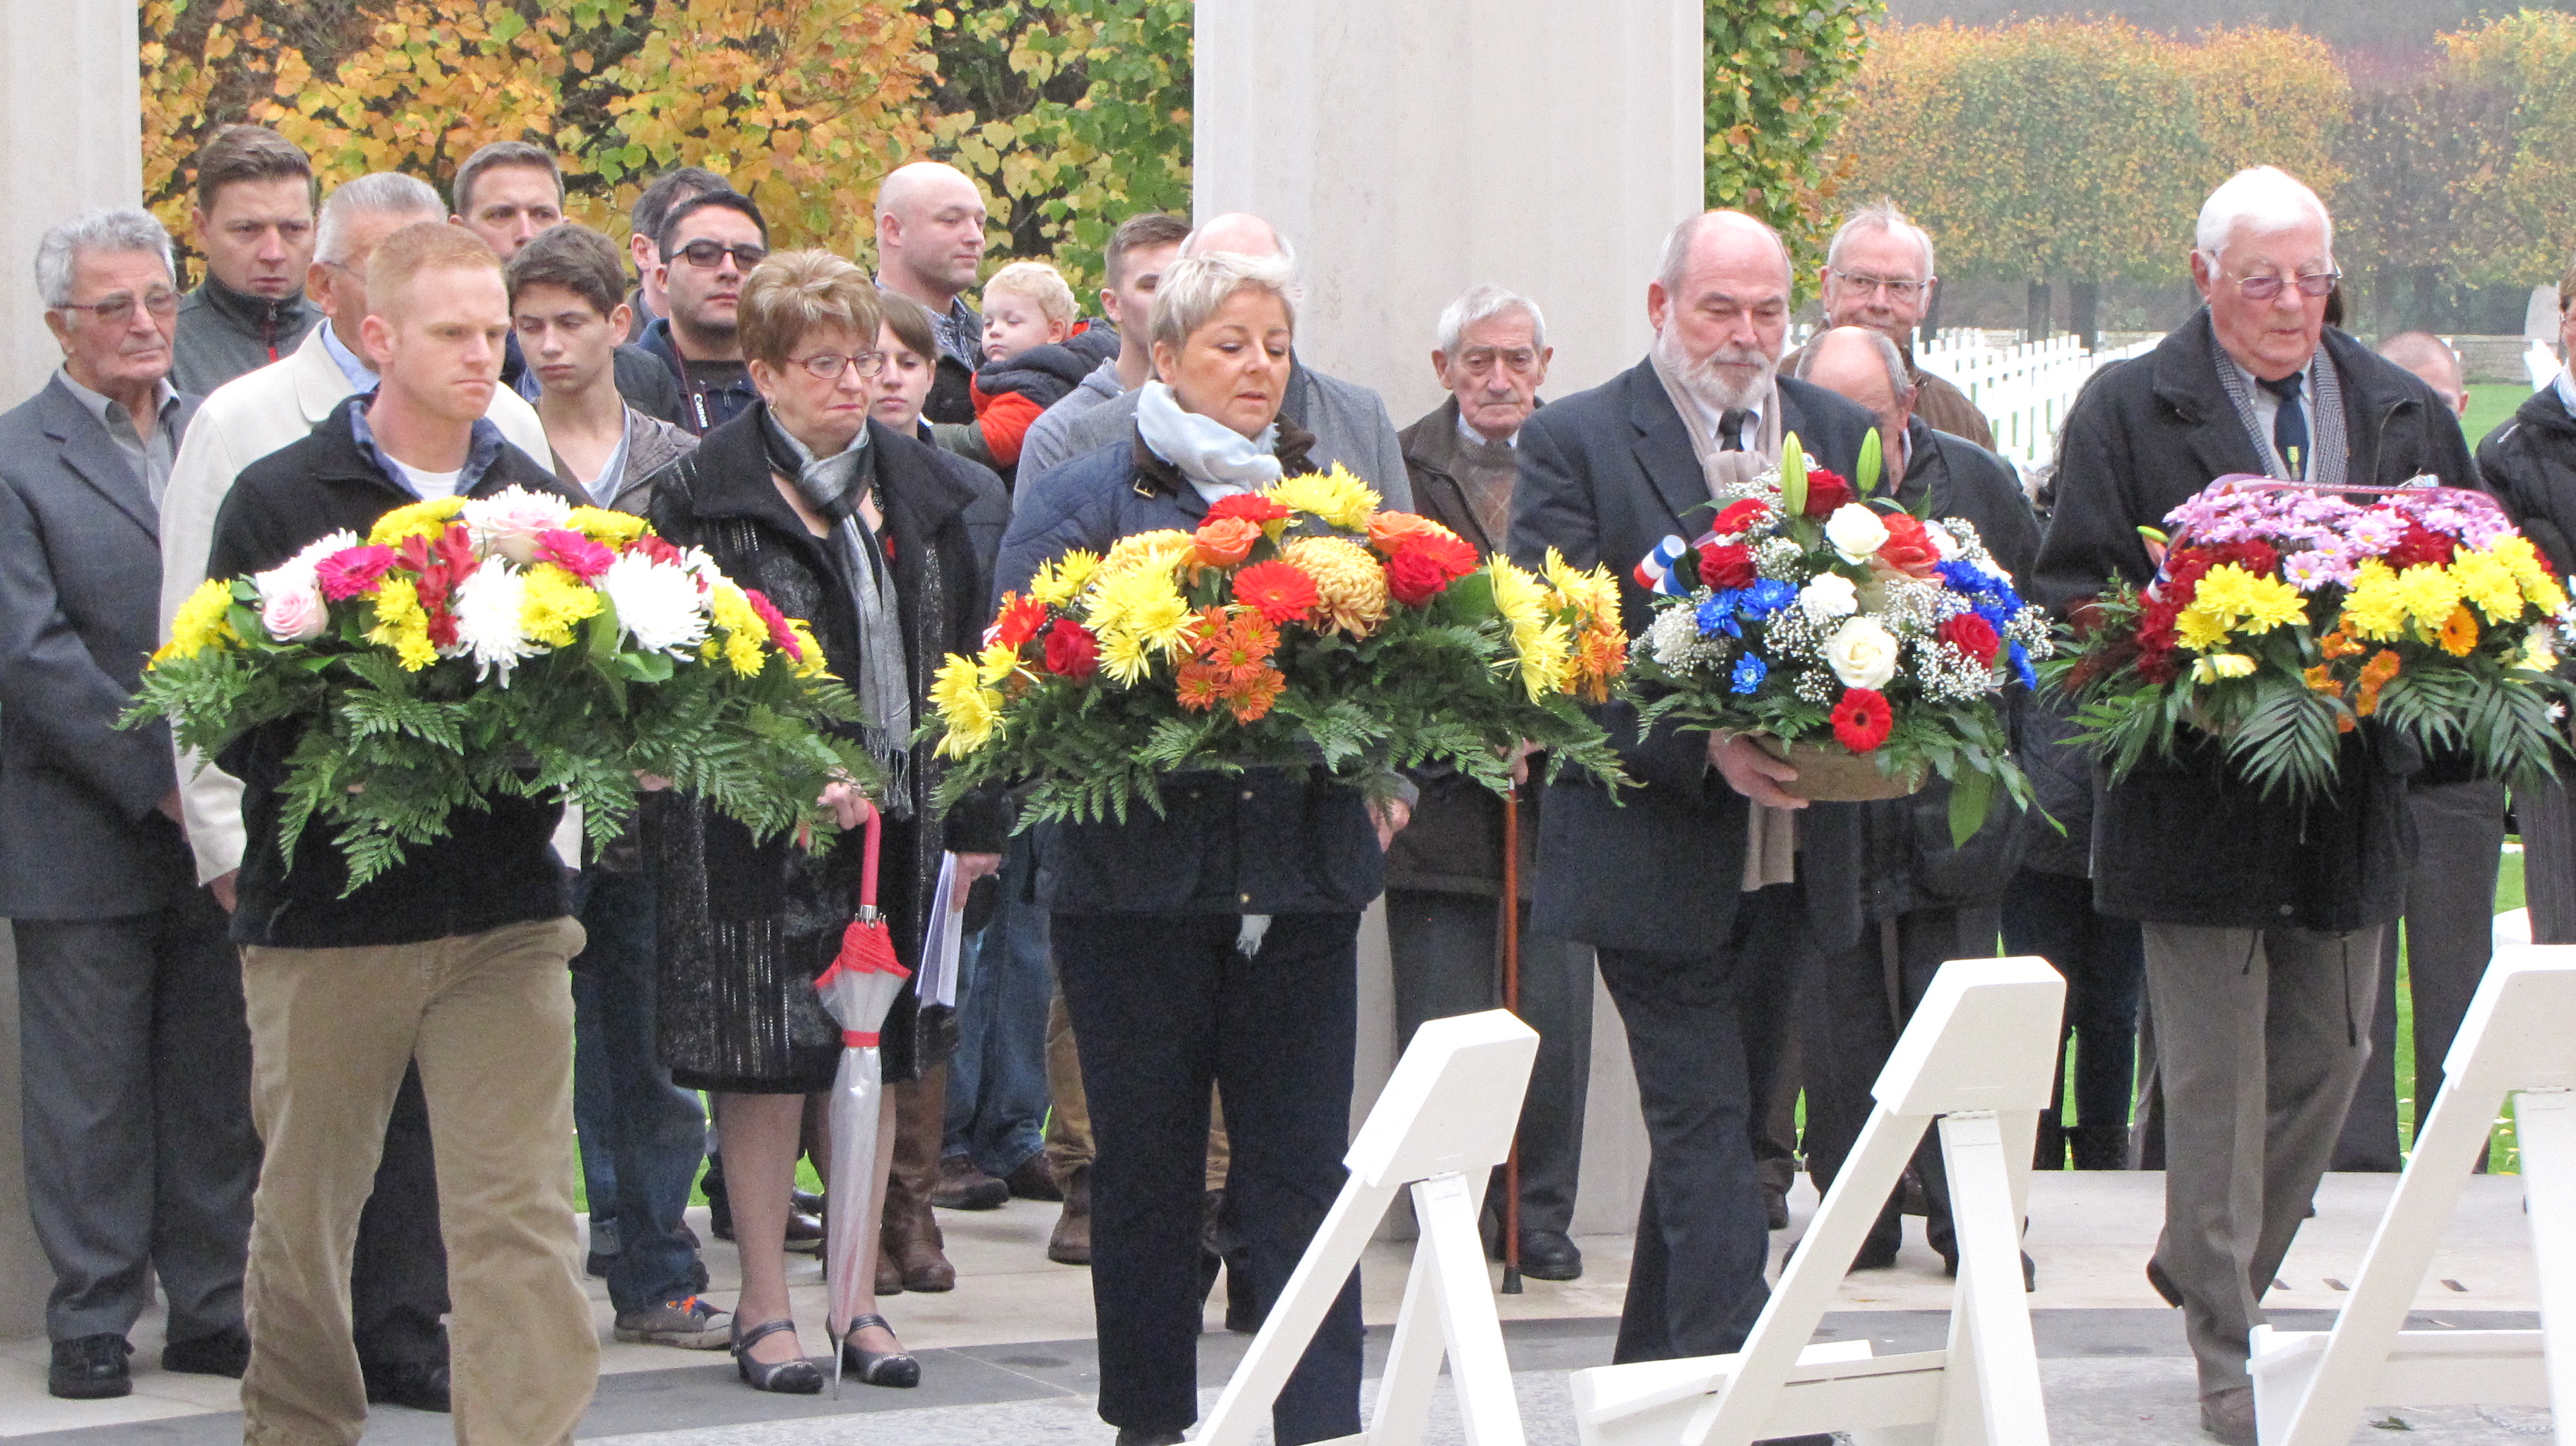 Four large floral wreaths are laid by members of the official party during the ceremony. 